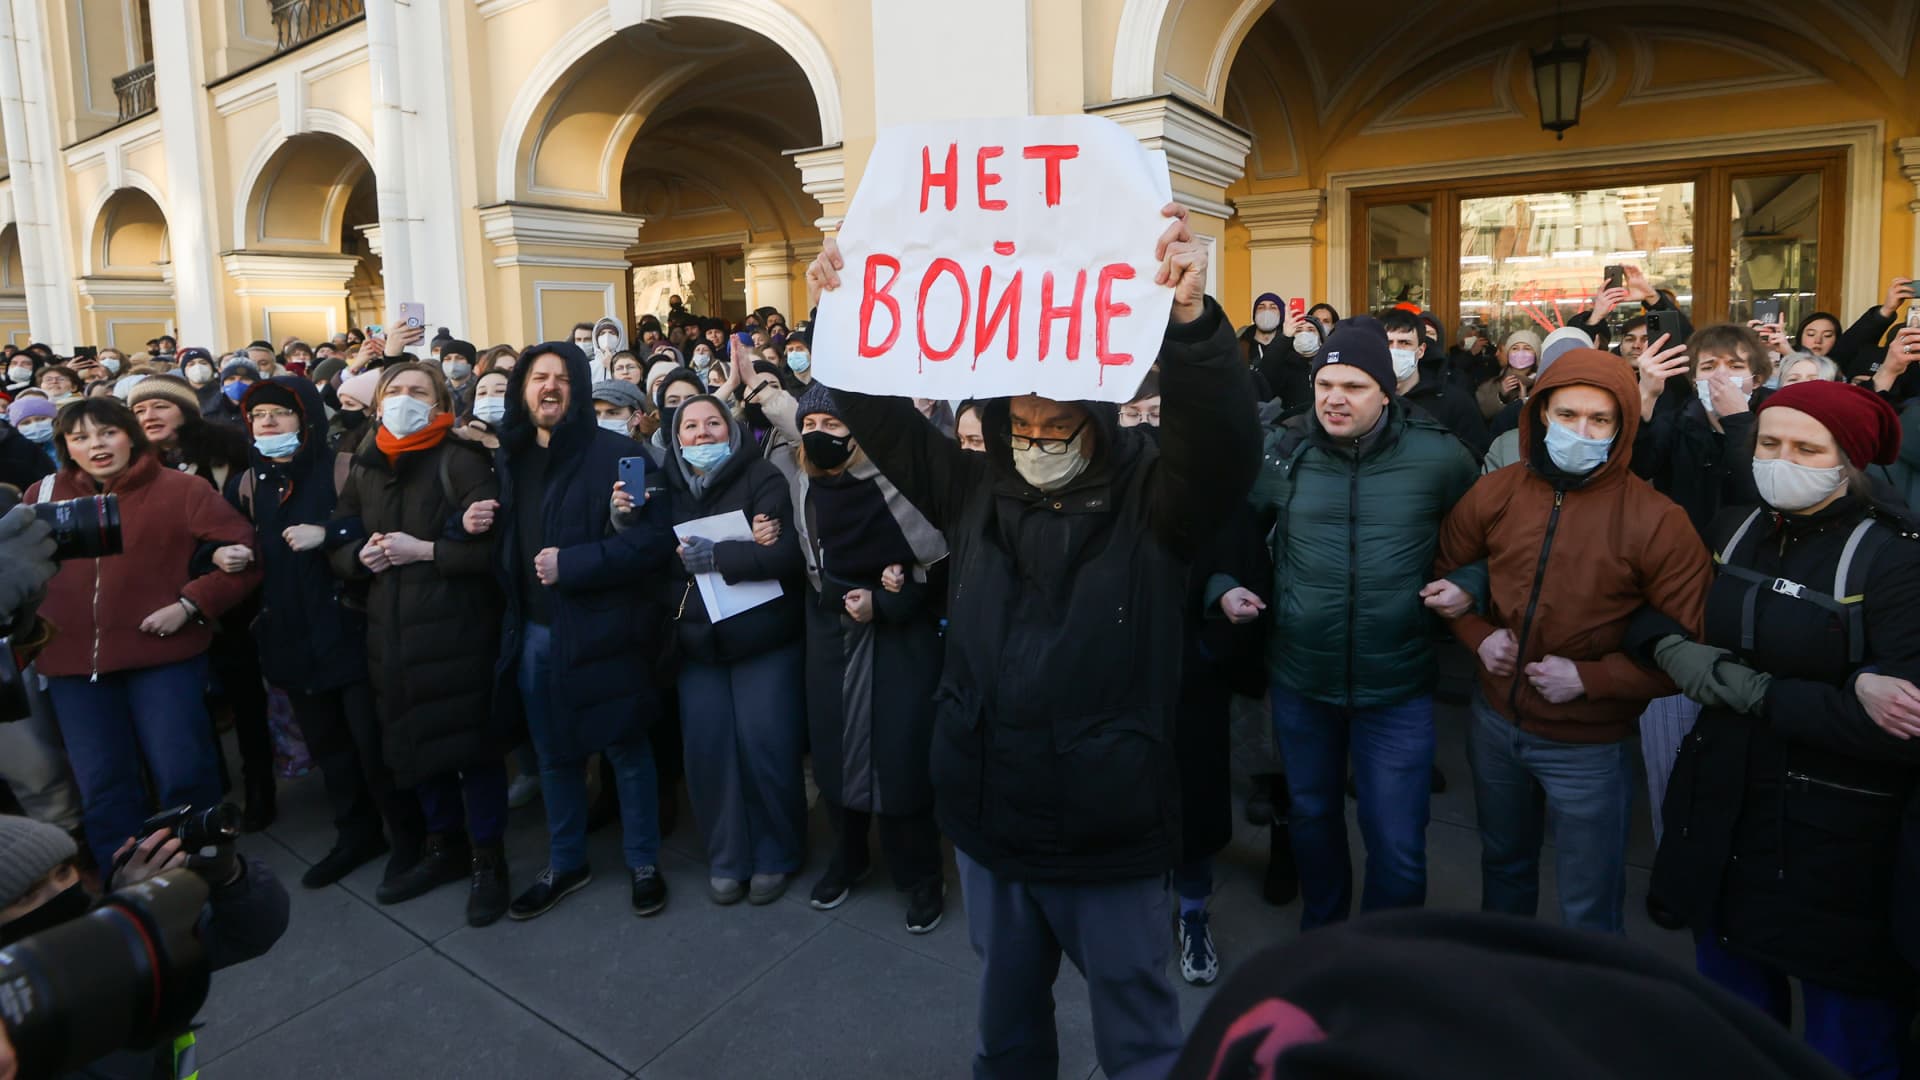 Participants in an unauthorized rally in central St Petersburg against the Russian military operation in Ukraine. Early on February 24, President Putin announced a special military operation by the Russian Armed Forces in response to appeals for help from the leaders of the Donetsk and the Lugansk People's Republics. The poster reads 'No to war'.